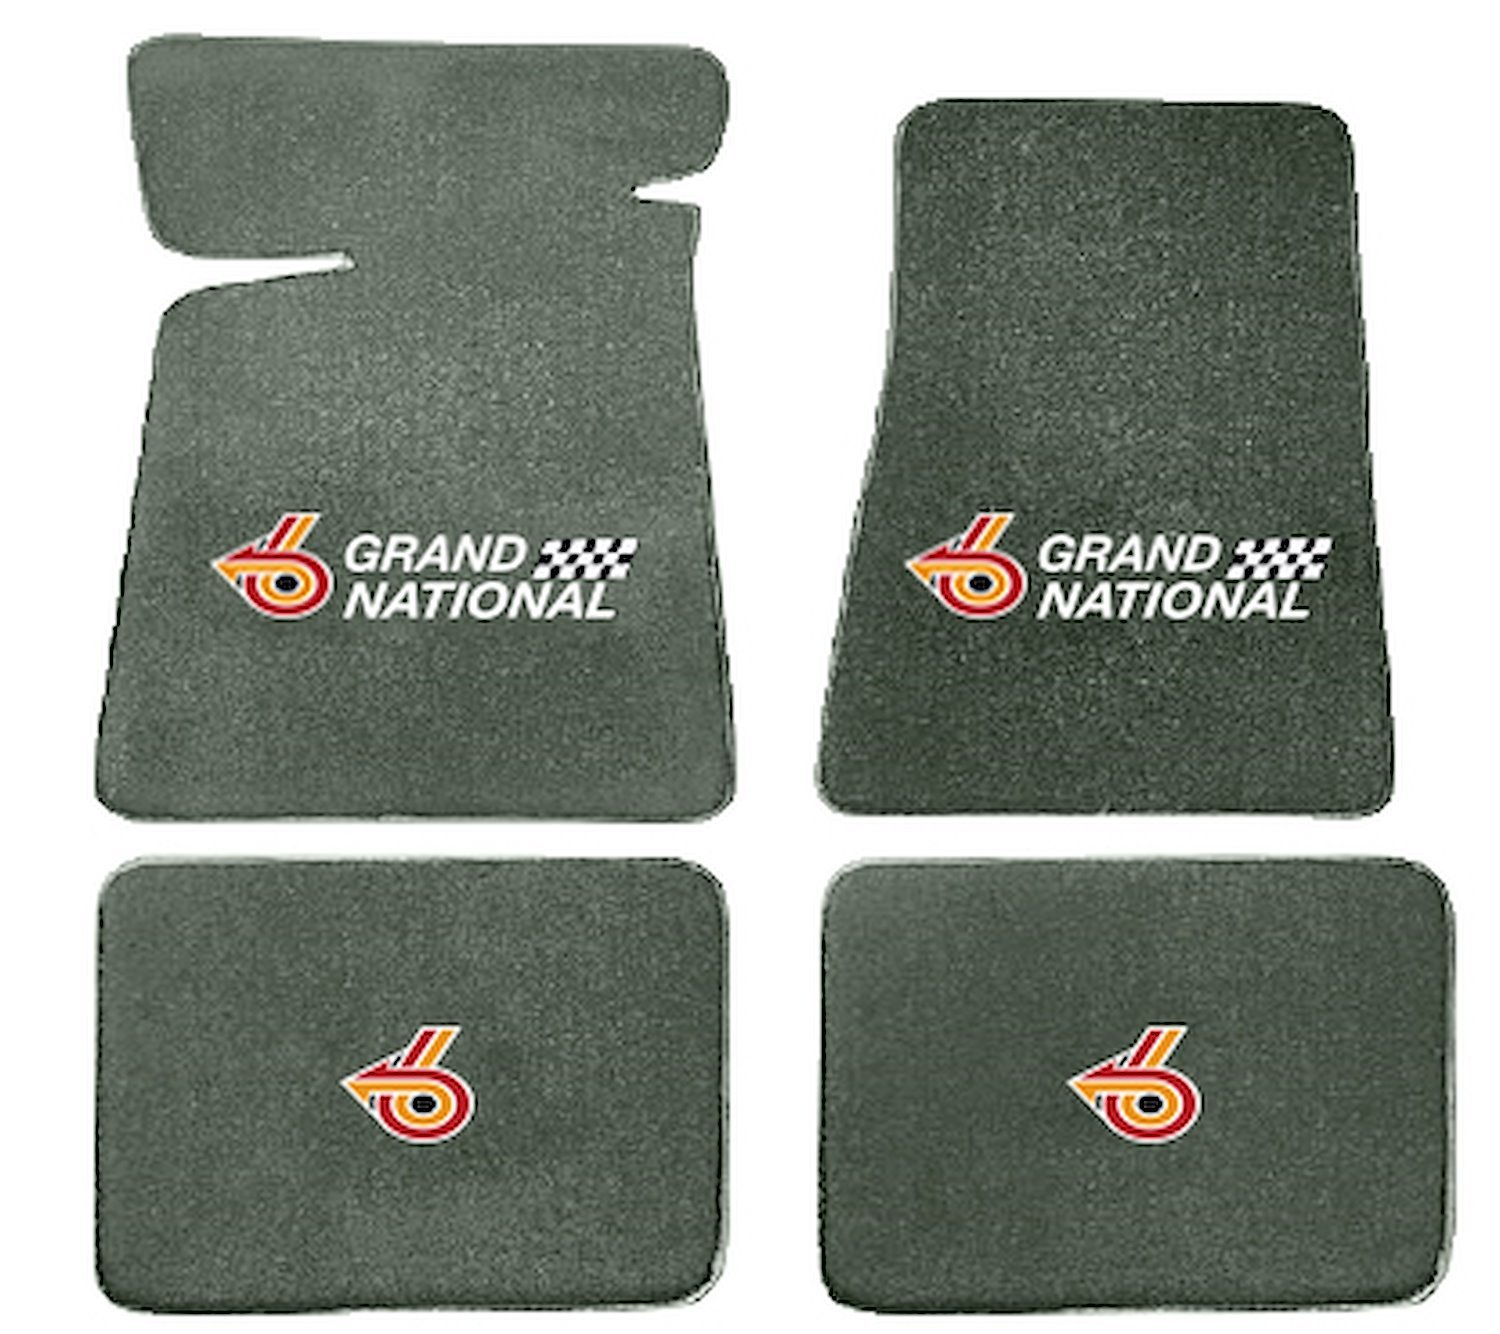 Molded Cut Pile Floor Mats for 1984-1987 Buick Regal Grand National [4-Piece, W/Grand National Logo, Dove Gray]